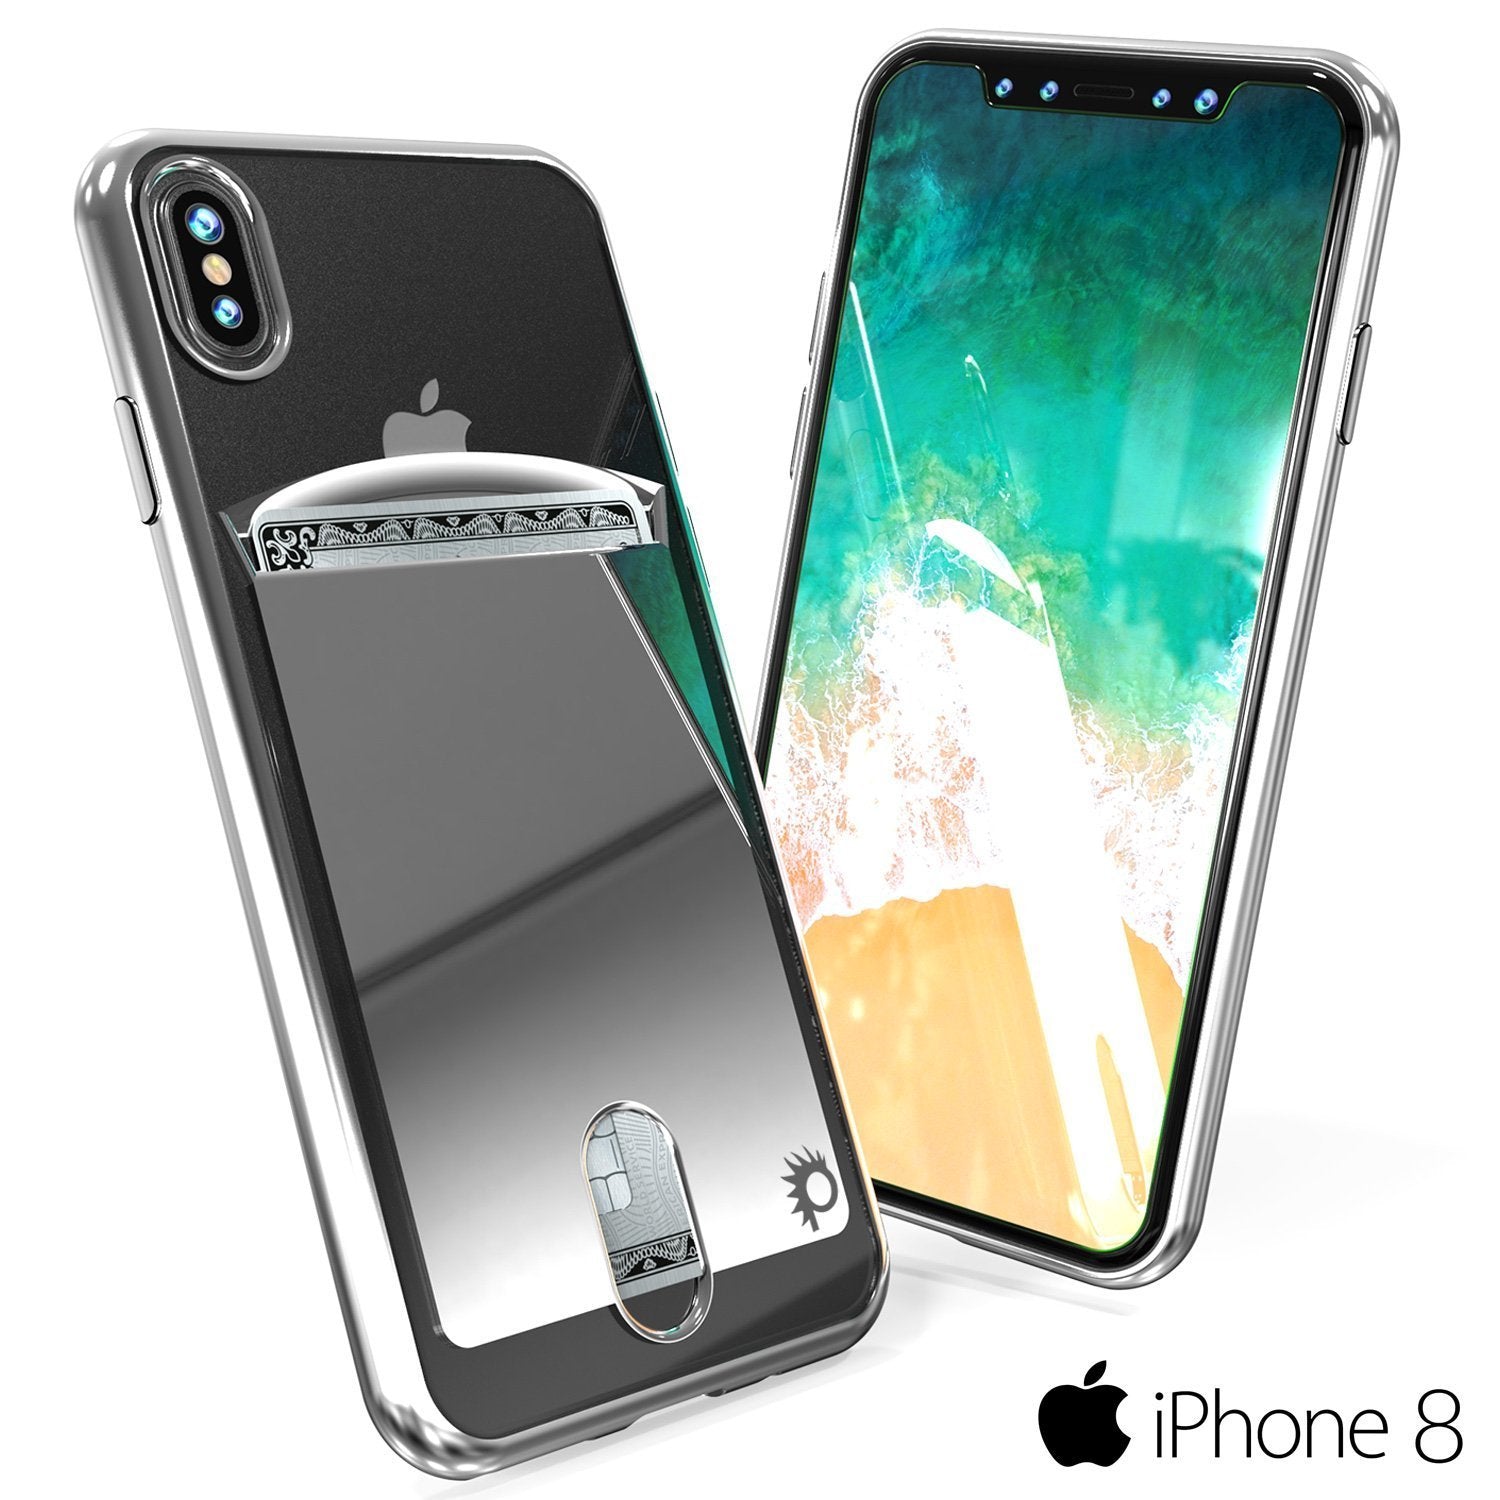 iPhone 8 Case, PUNKcase [LUCID Series] Slim Fit Protective Dual Layer Armor Cover W/ Scratch Resistant Screen Protector [SILVER]